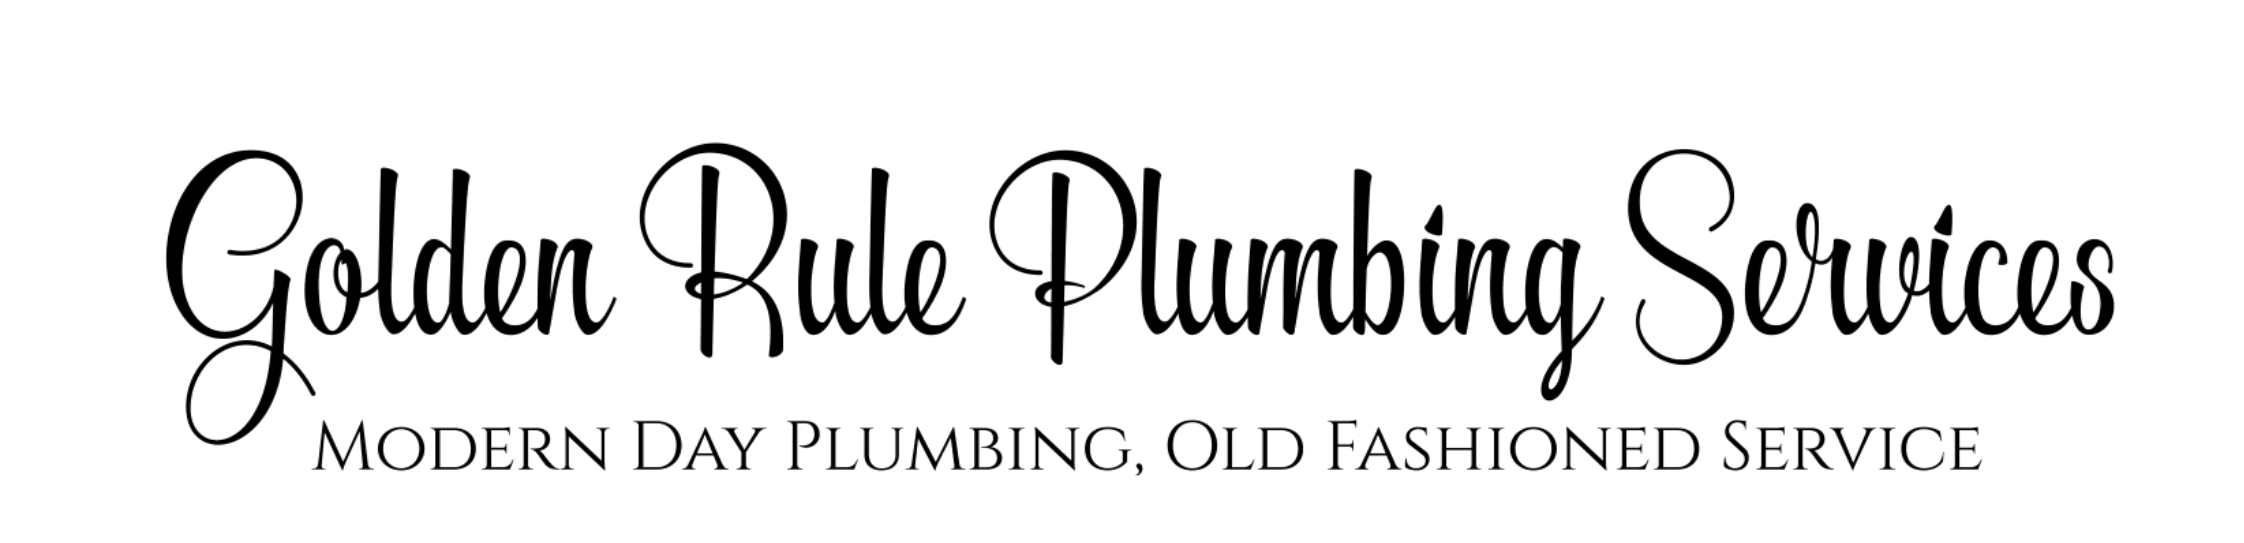 Knightdale Plumbers | Golden Rule Plumbing Services